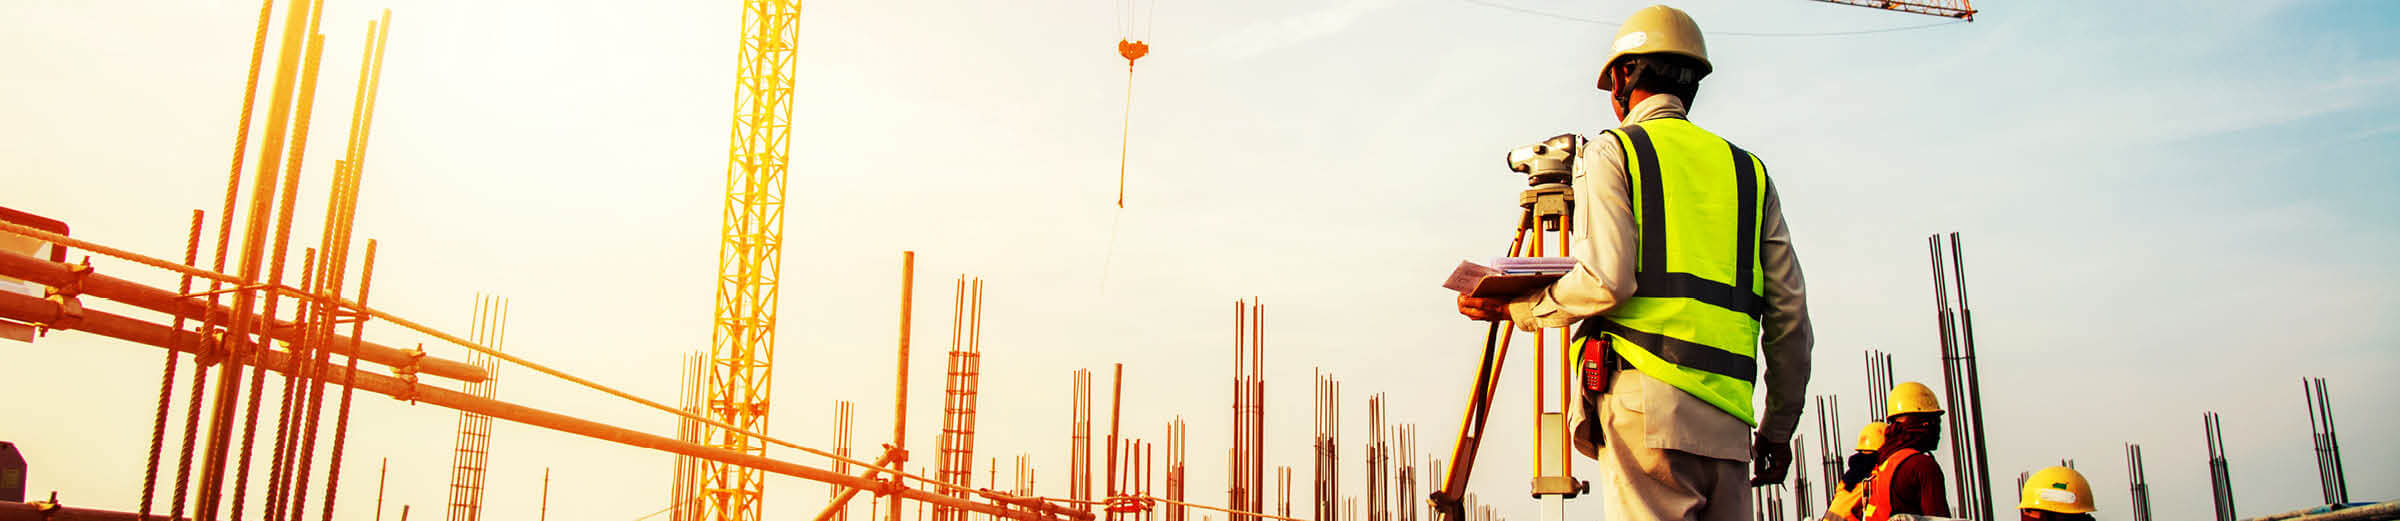 A worker in a yellow vest and hard hat looks up, beyond a surveying tool, at a worksite